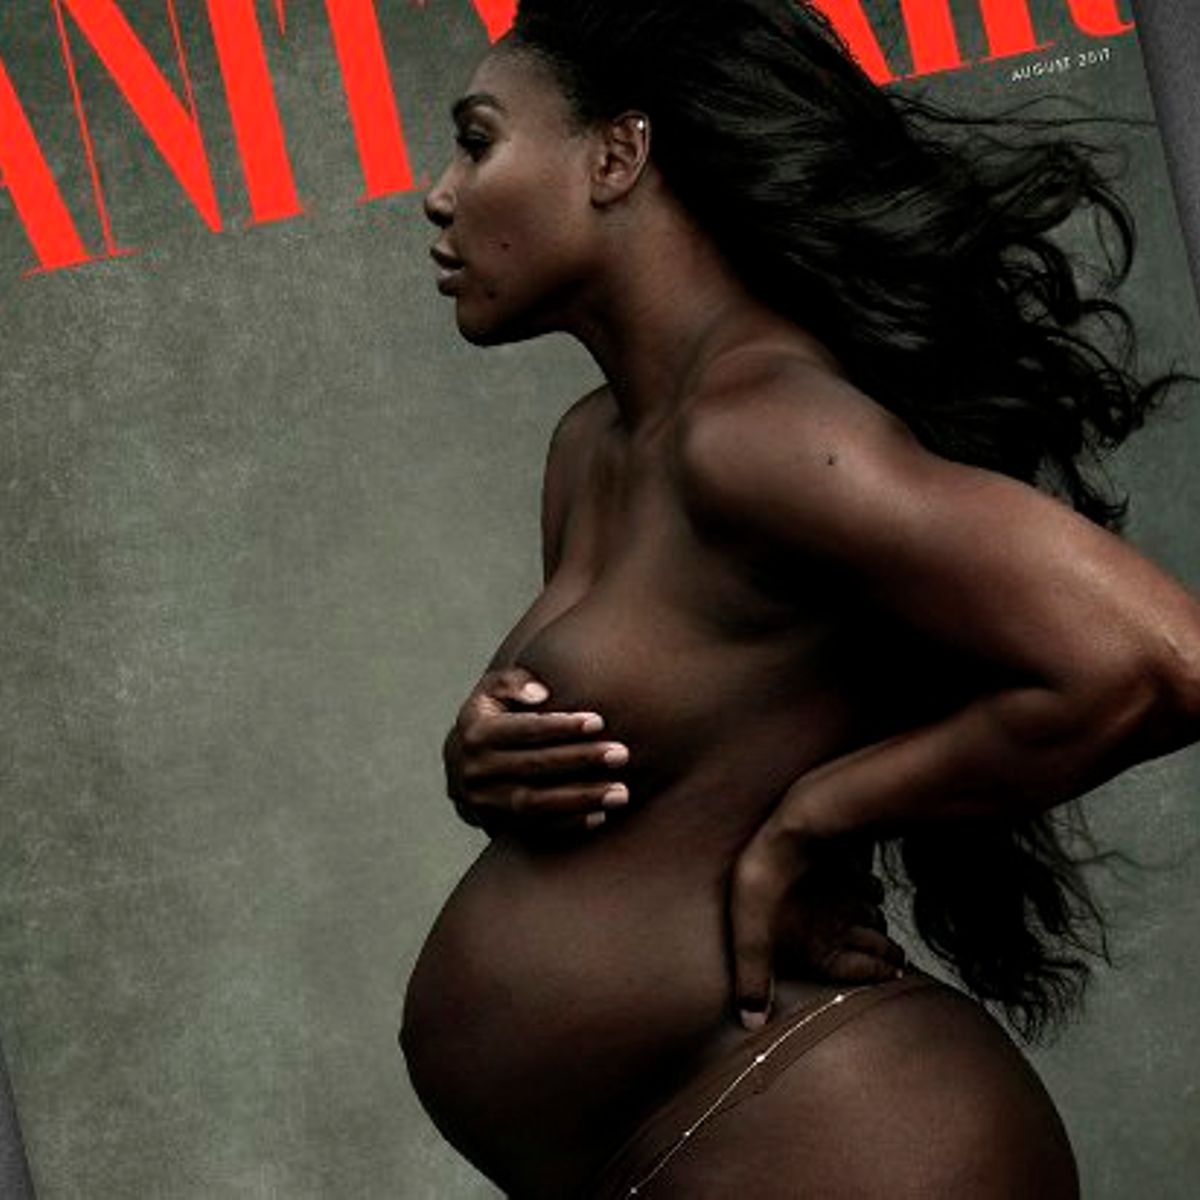 Pregnant Serena Williams posed naked on the cover of Vanity Fair magazine1....